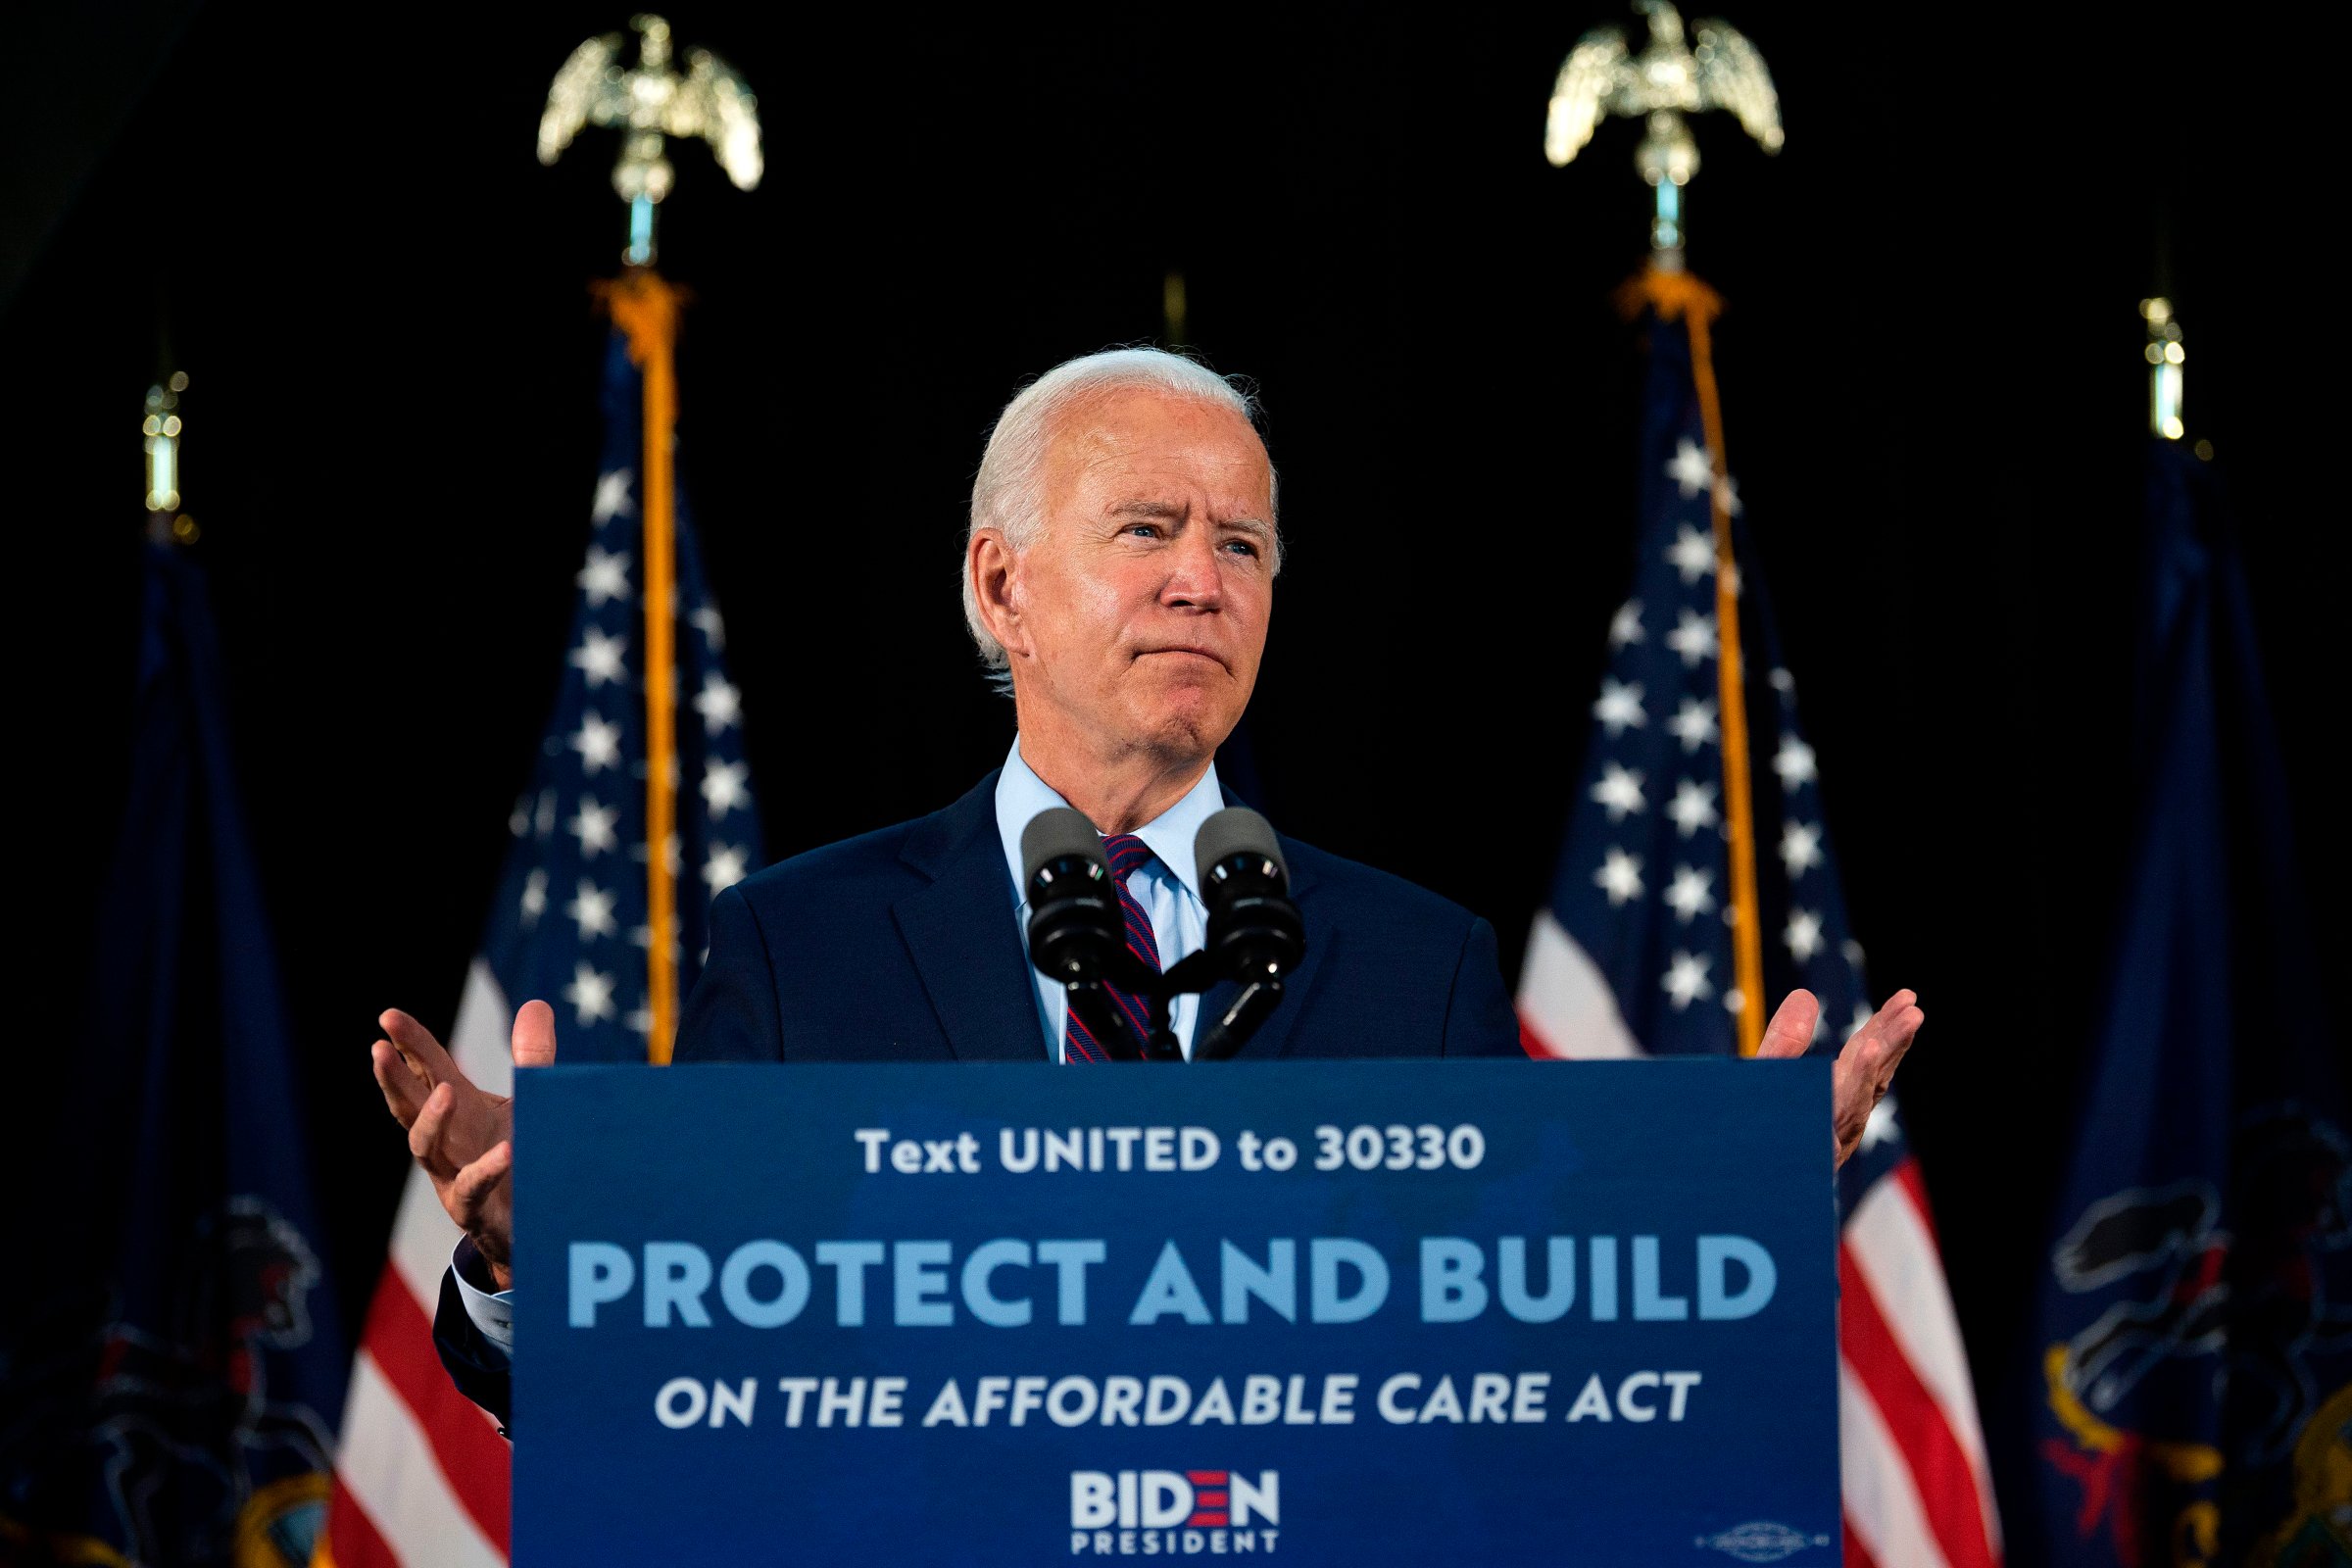 Democratic presidential candidate Joe Biden delivers remarks after meeting with Pennsylvania families who have benefited from the Affordable Care Act on June 25, 2020 in Lancaster, Pennsylvania.